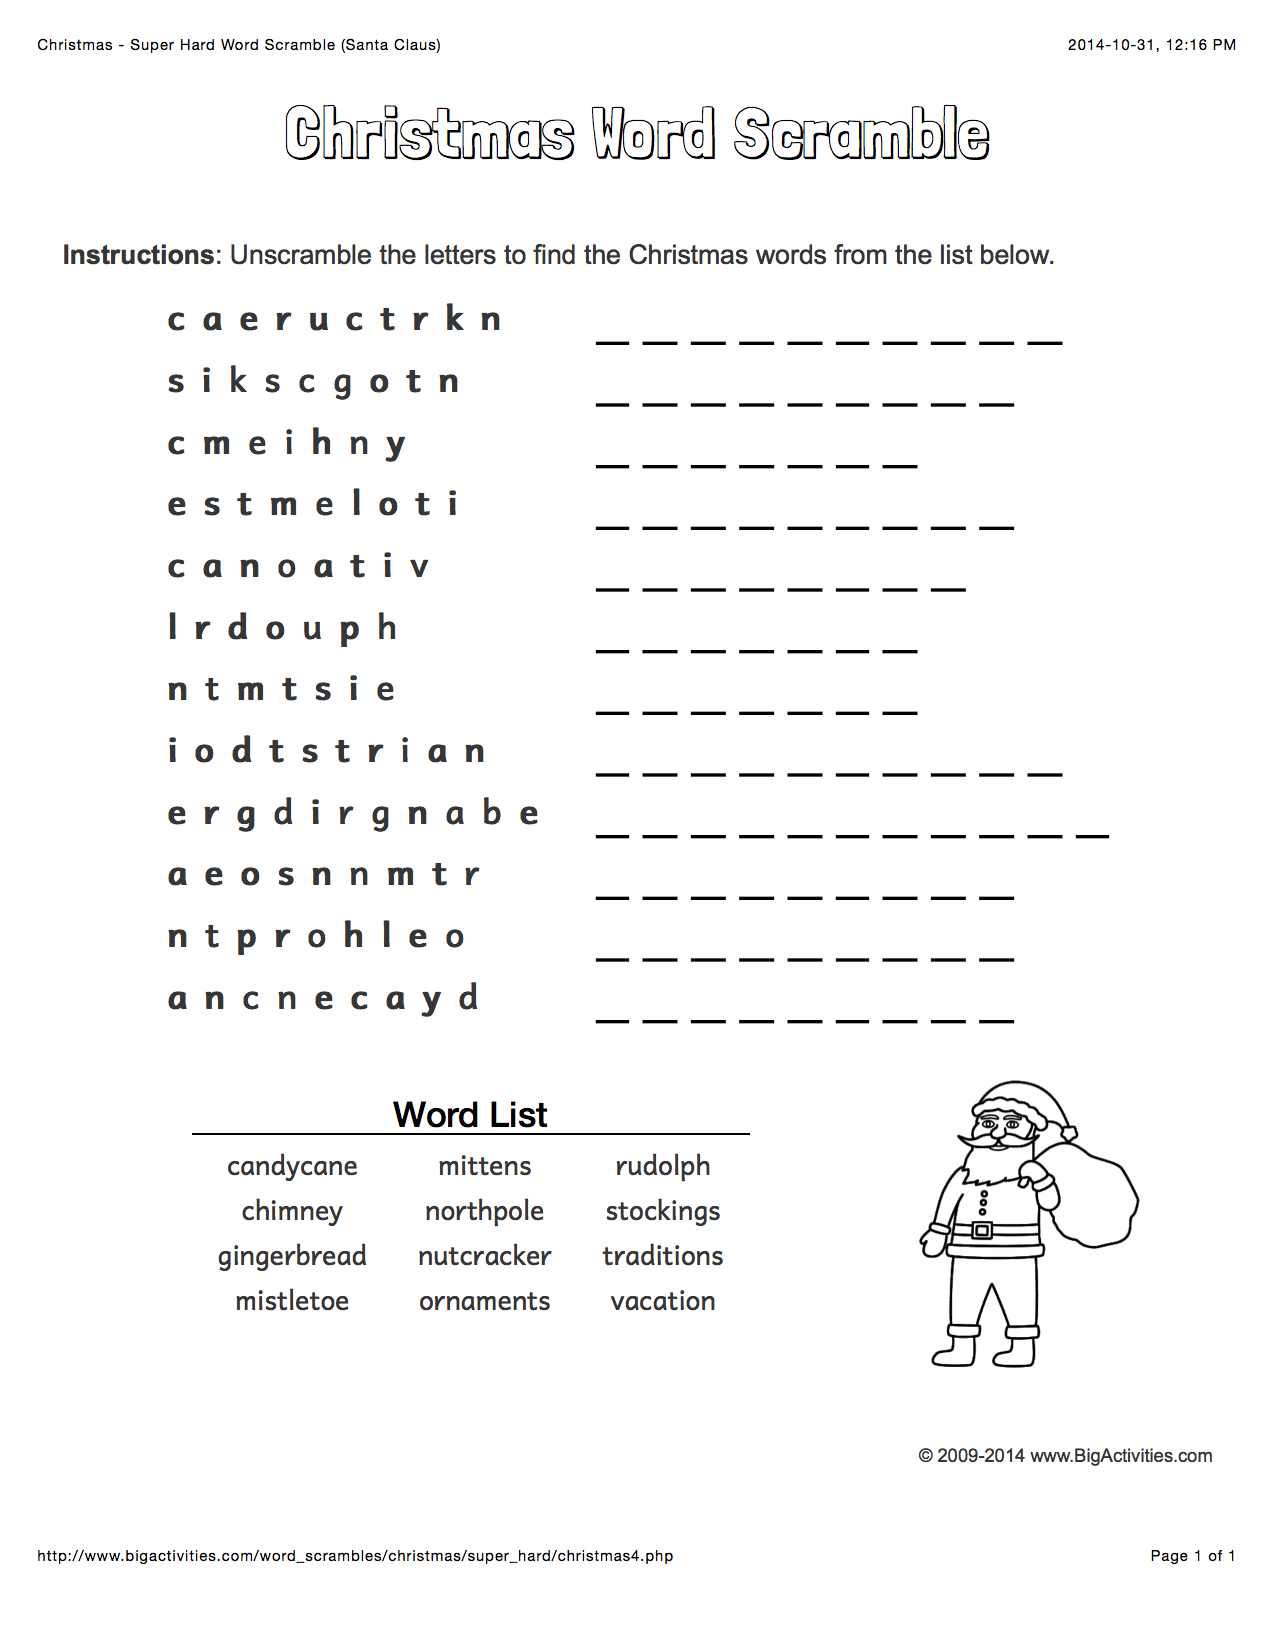 Christmas Word Scramble With Santa Claus. 4 Levels Of